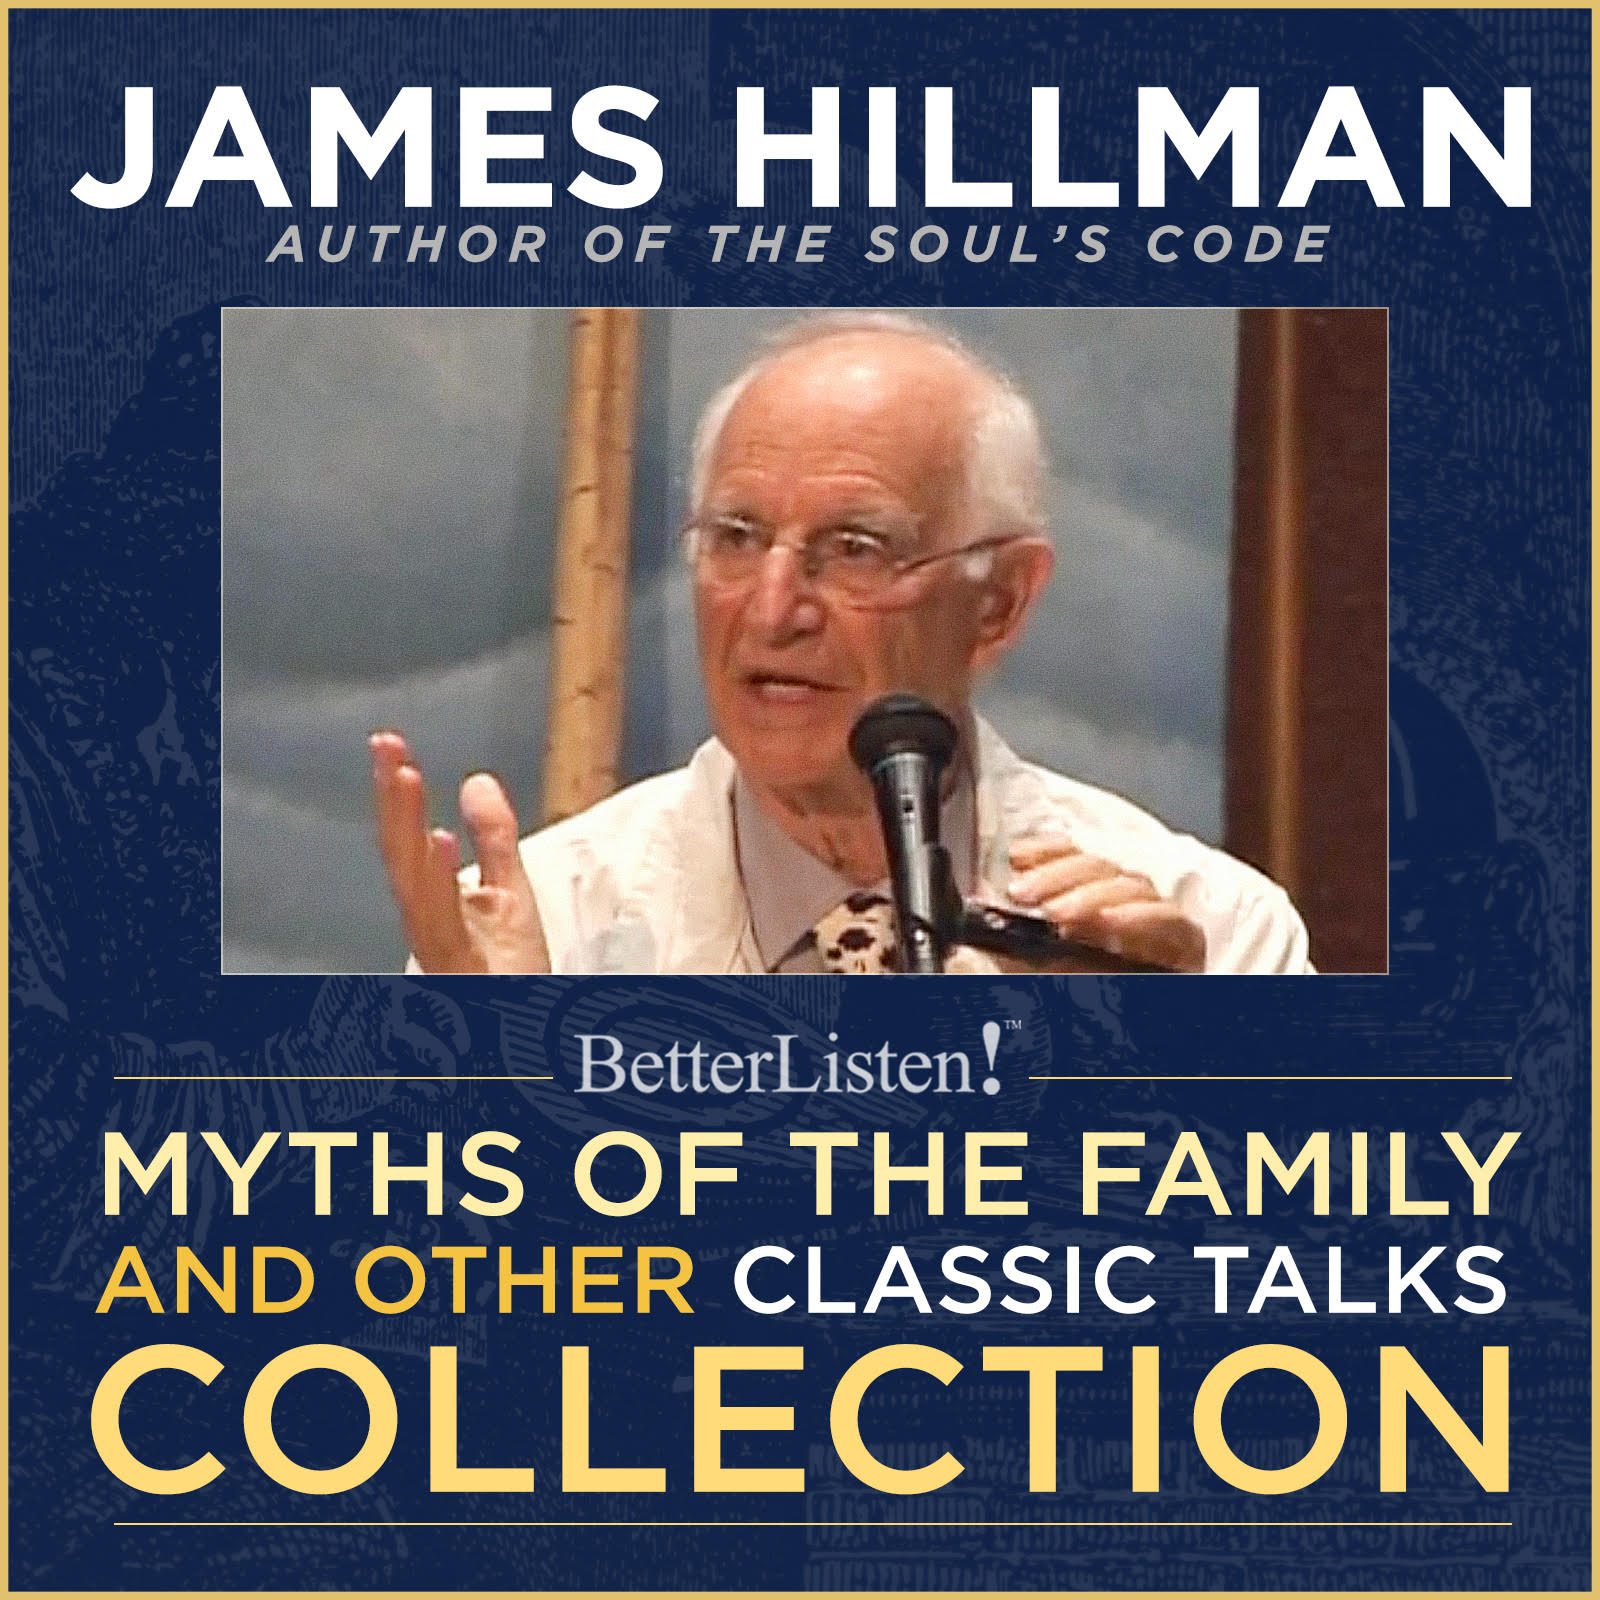 Myths of the Family and Other Classic Talks Collection with James Hillman